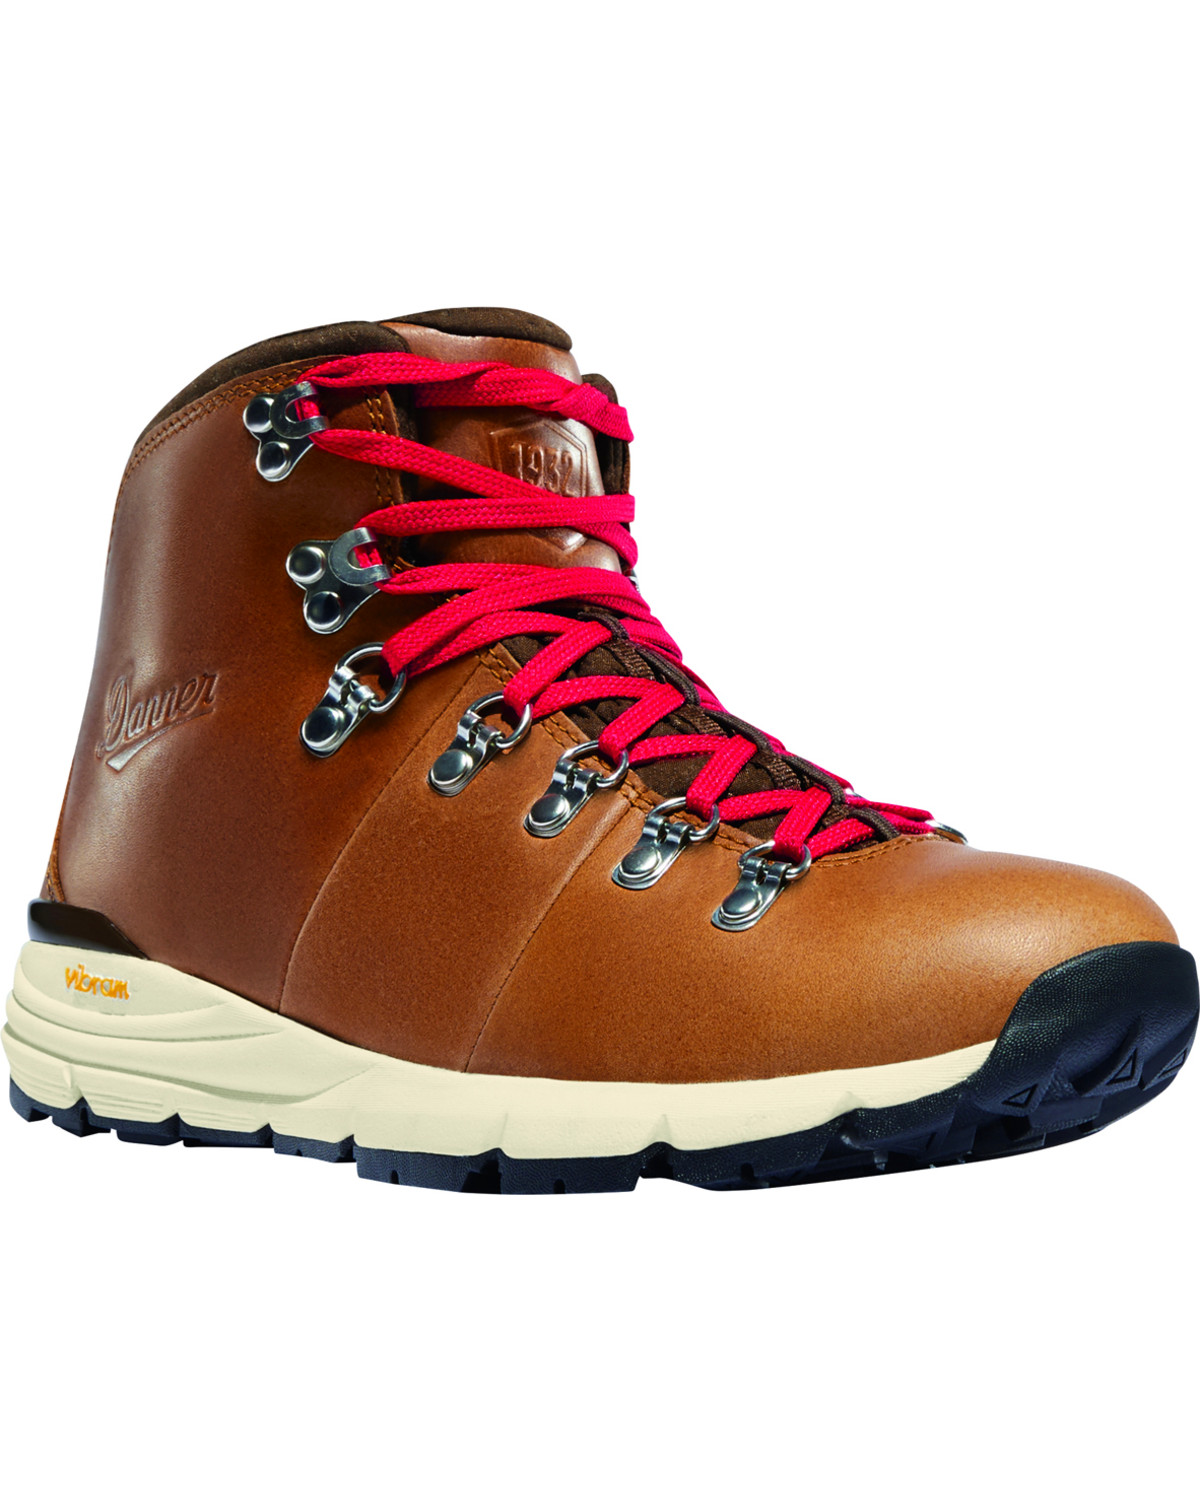 Danner Women's Mountain 600 Hiking Boots - Round Toe